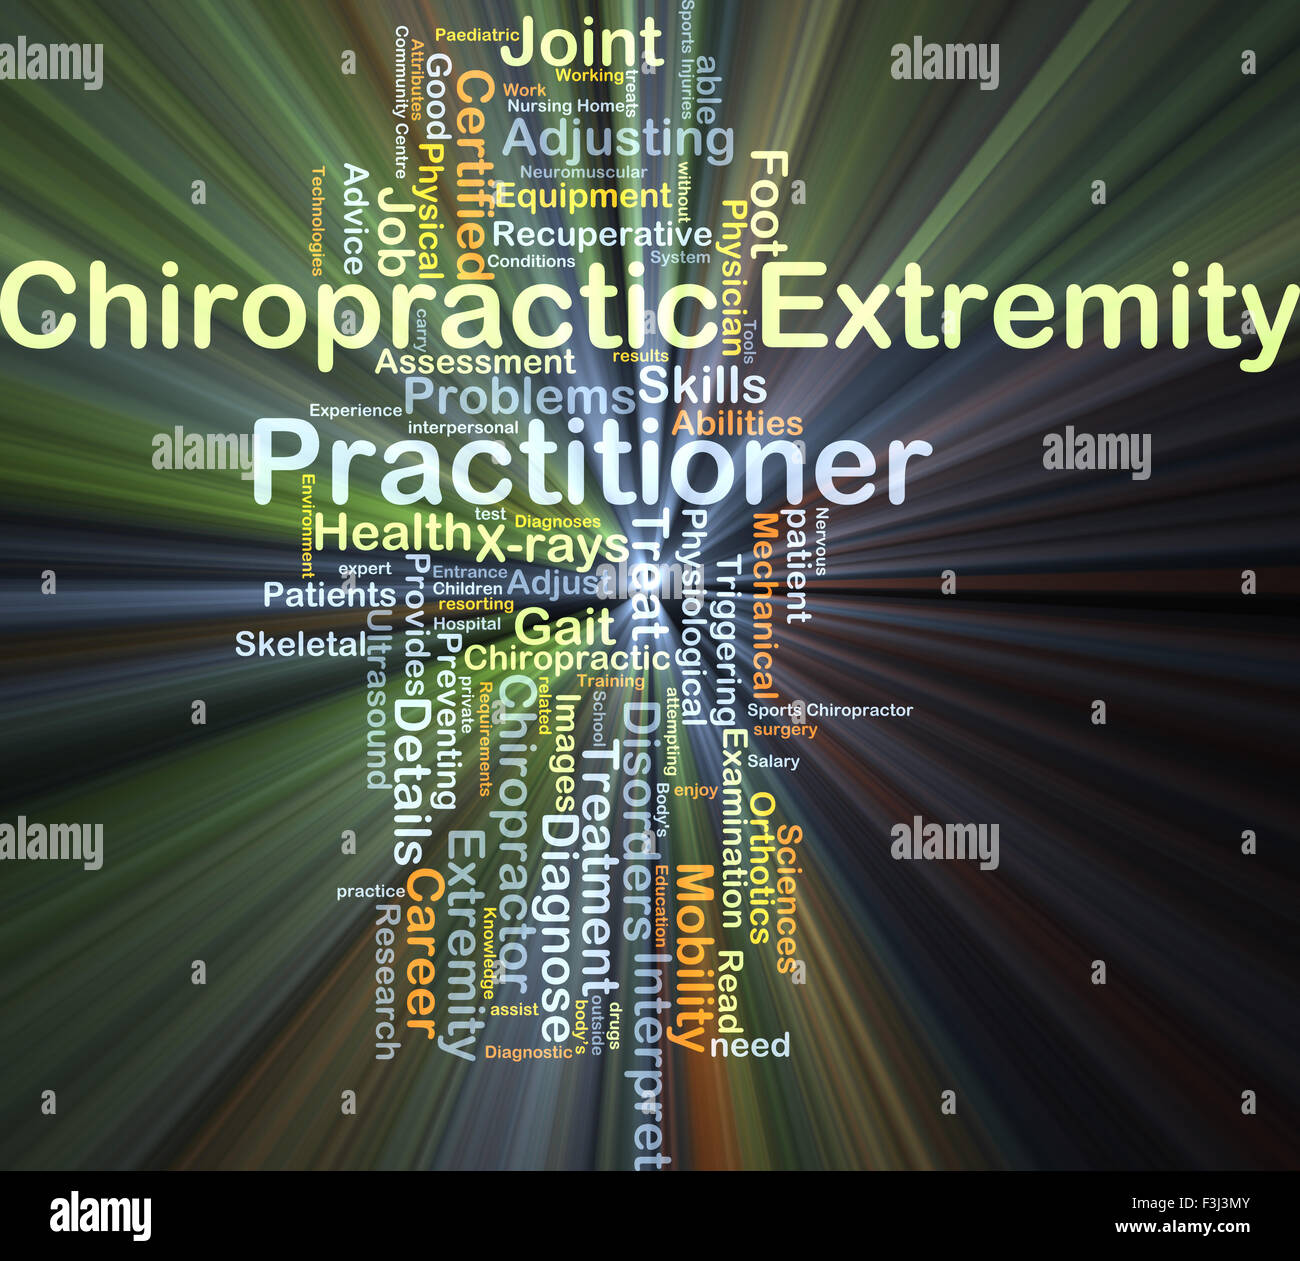 Background concept wordcloud illustration of chiropractic extremity practitioner glowing light Stock Photo